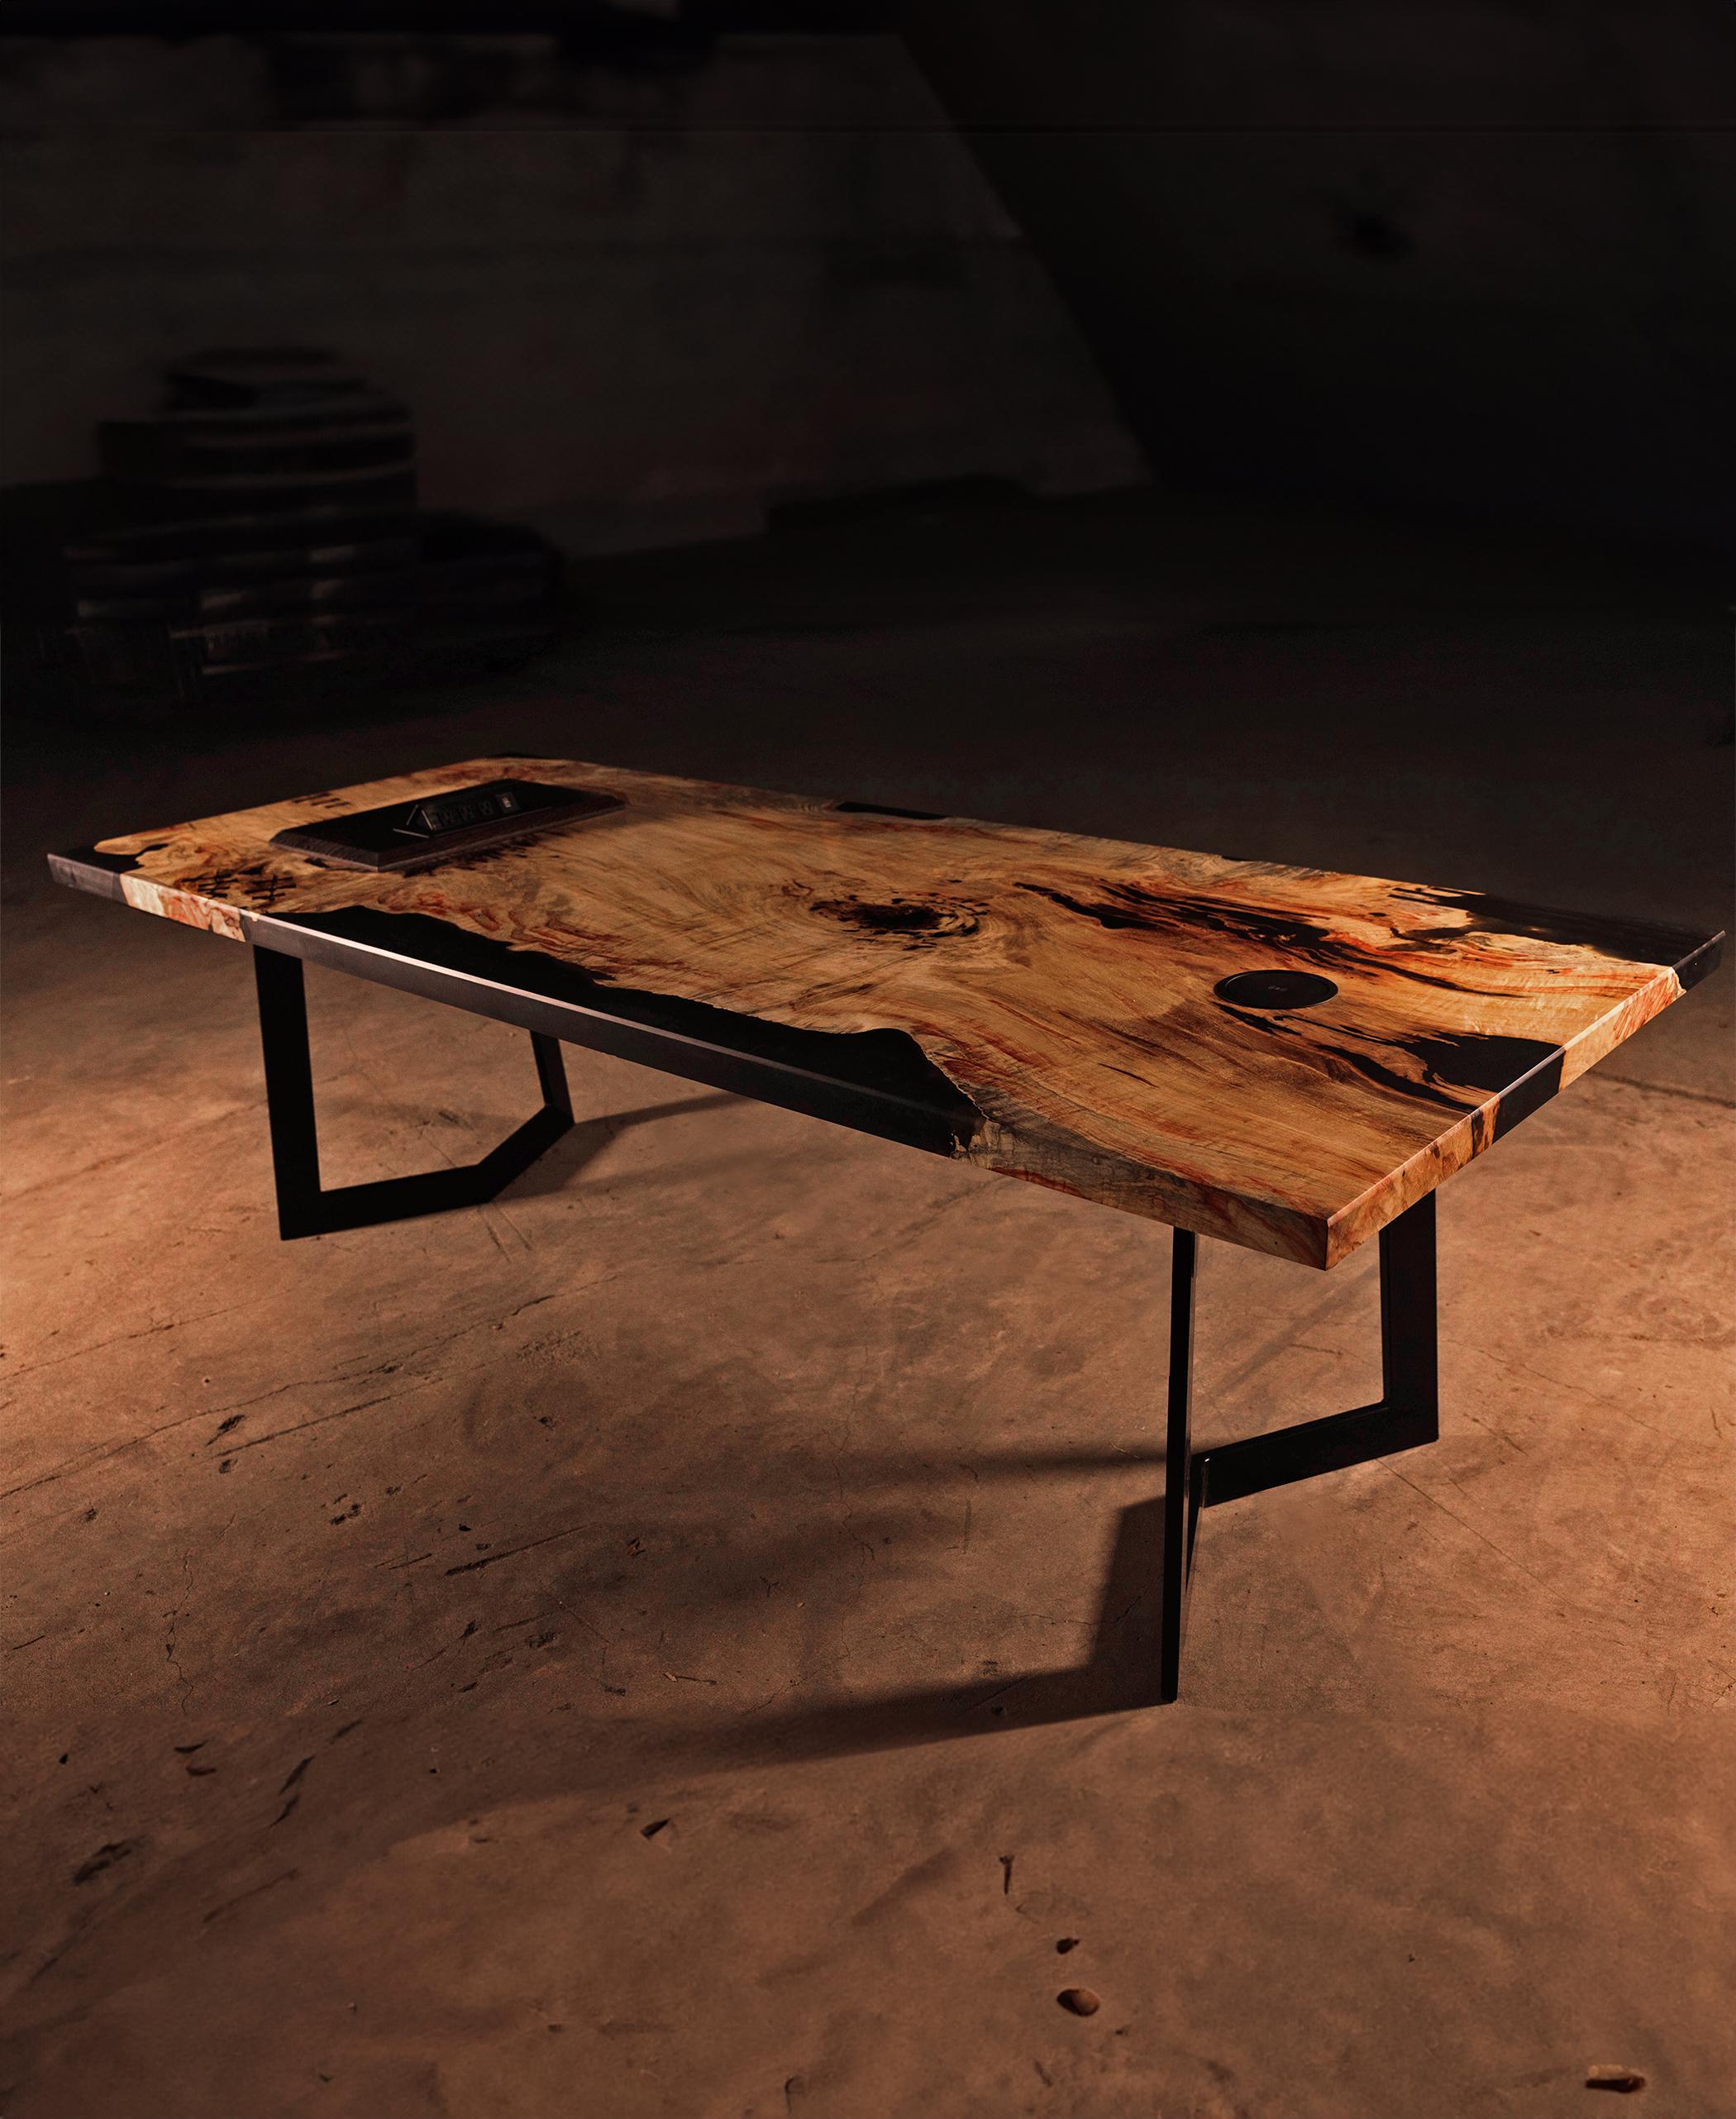 Crafted with Wenge accents, this table boasts intricate bow ties, strips, and inserts, each meticulously placed to accentuate the natural beauty of the wood. A custom base and seamlessly integrated high-end electronics enhance functionality while